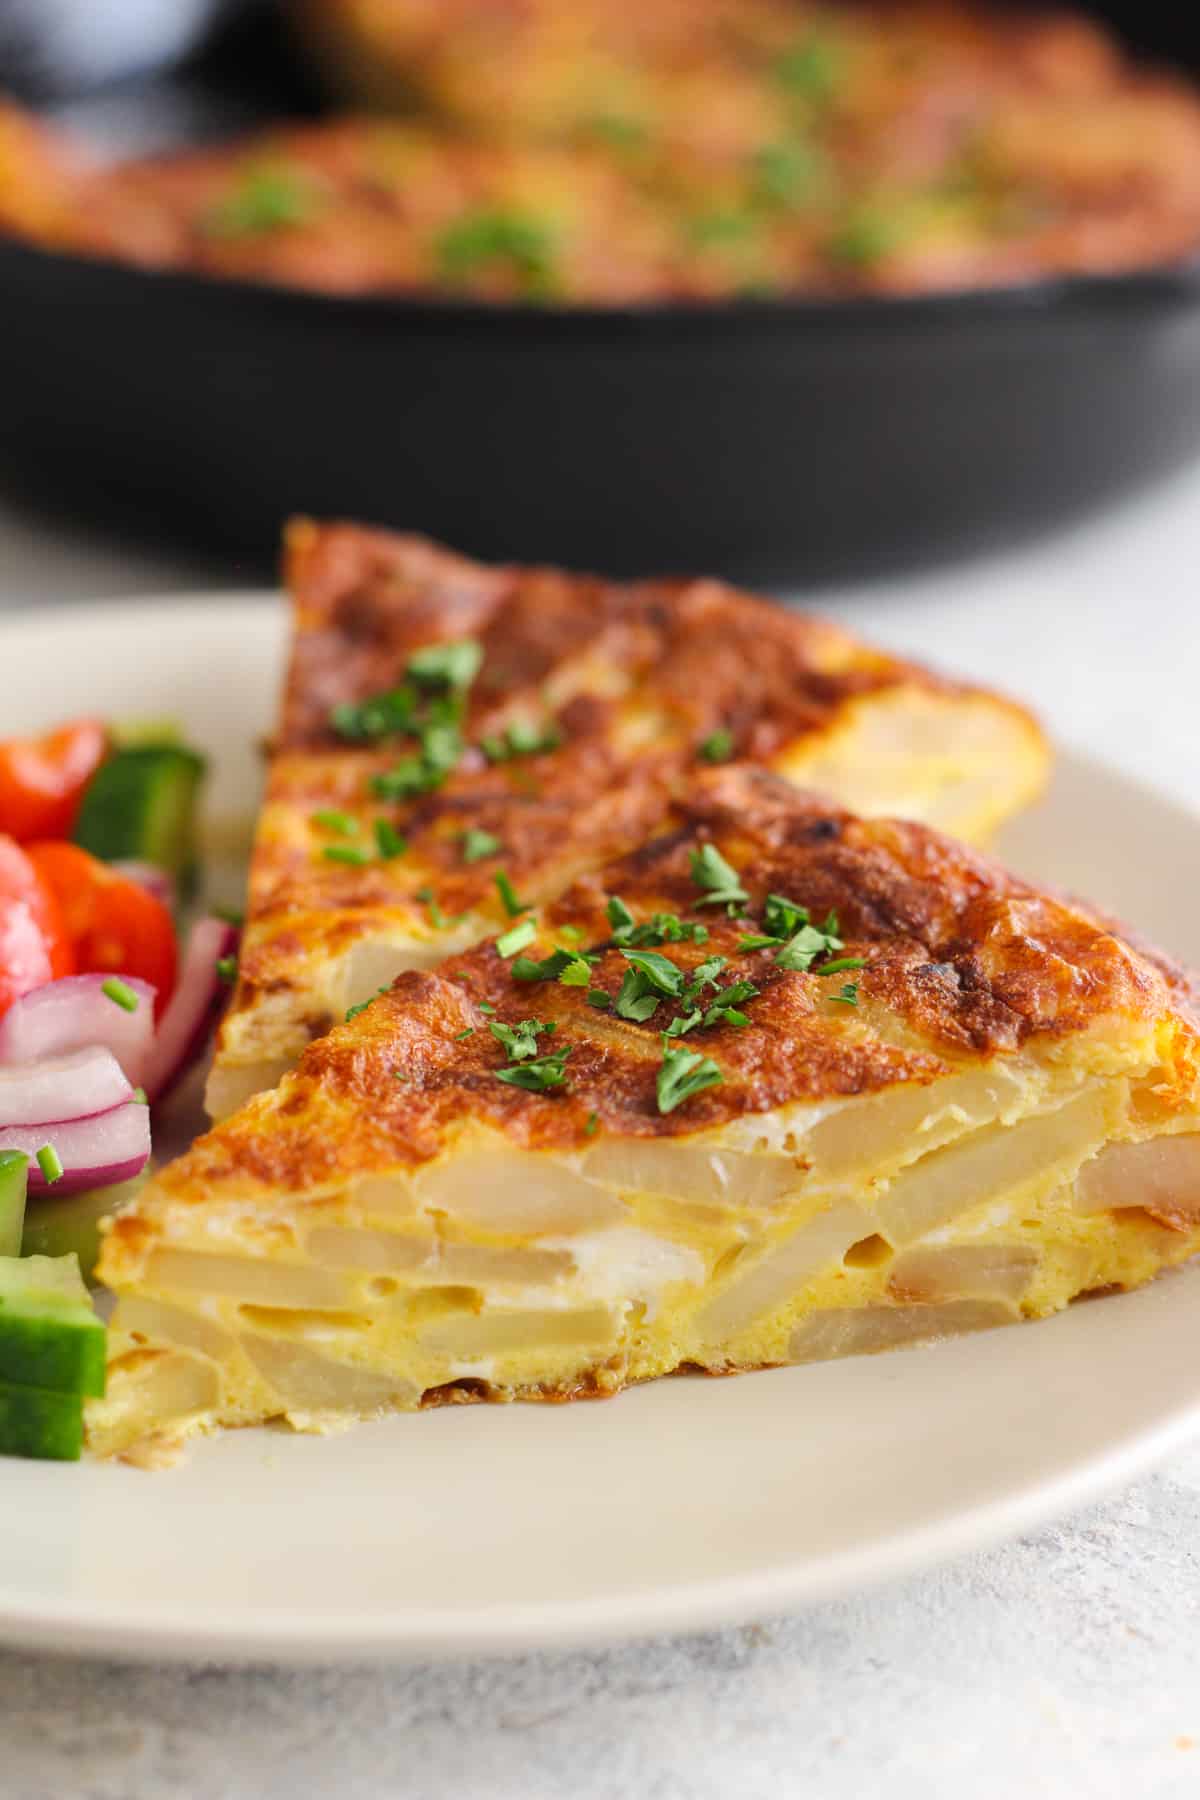 Spanish tortilla recipe is easy and very tasty. The slices show the potatoes beautifully.